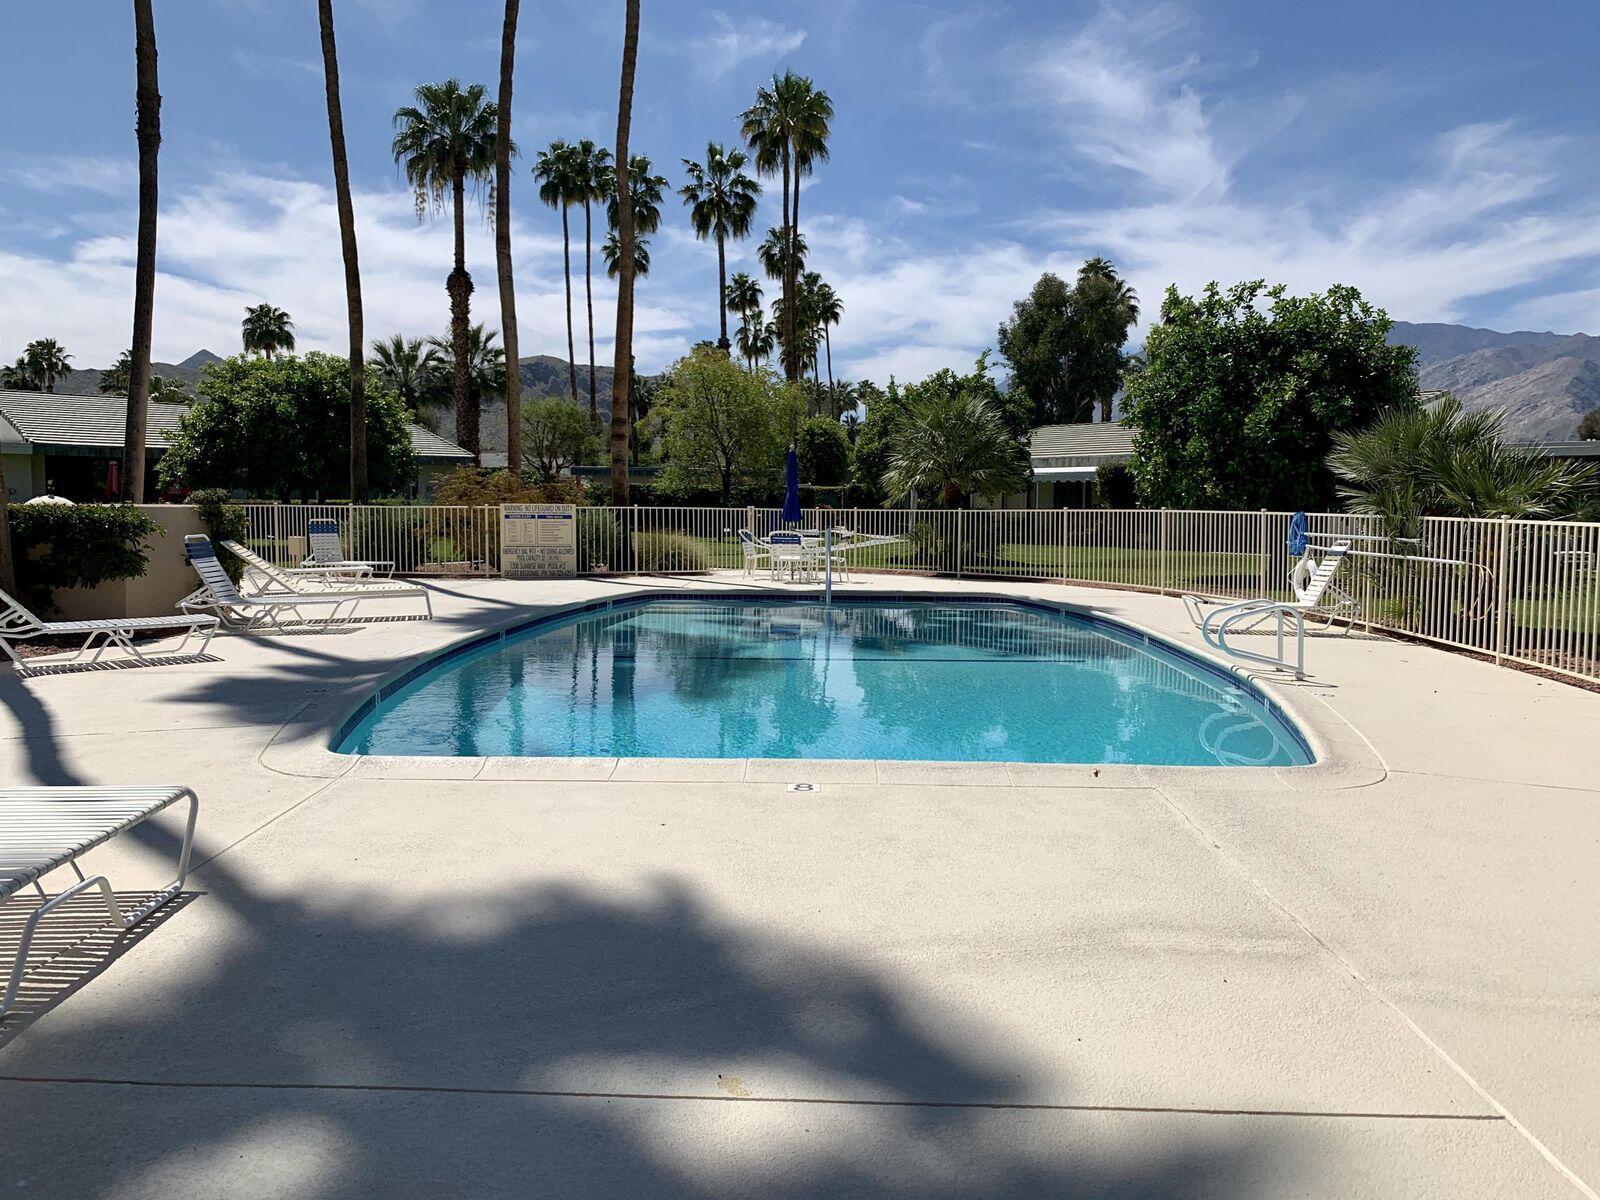 a view of a swimming pool with a lawn chairs under palm trees